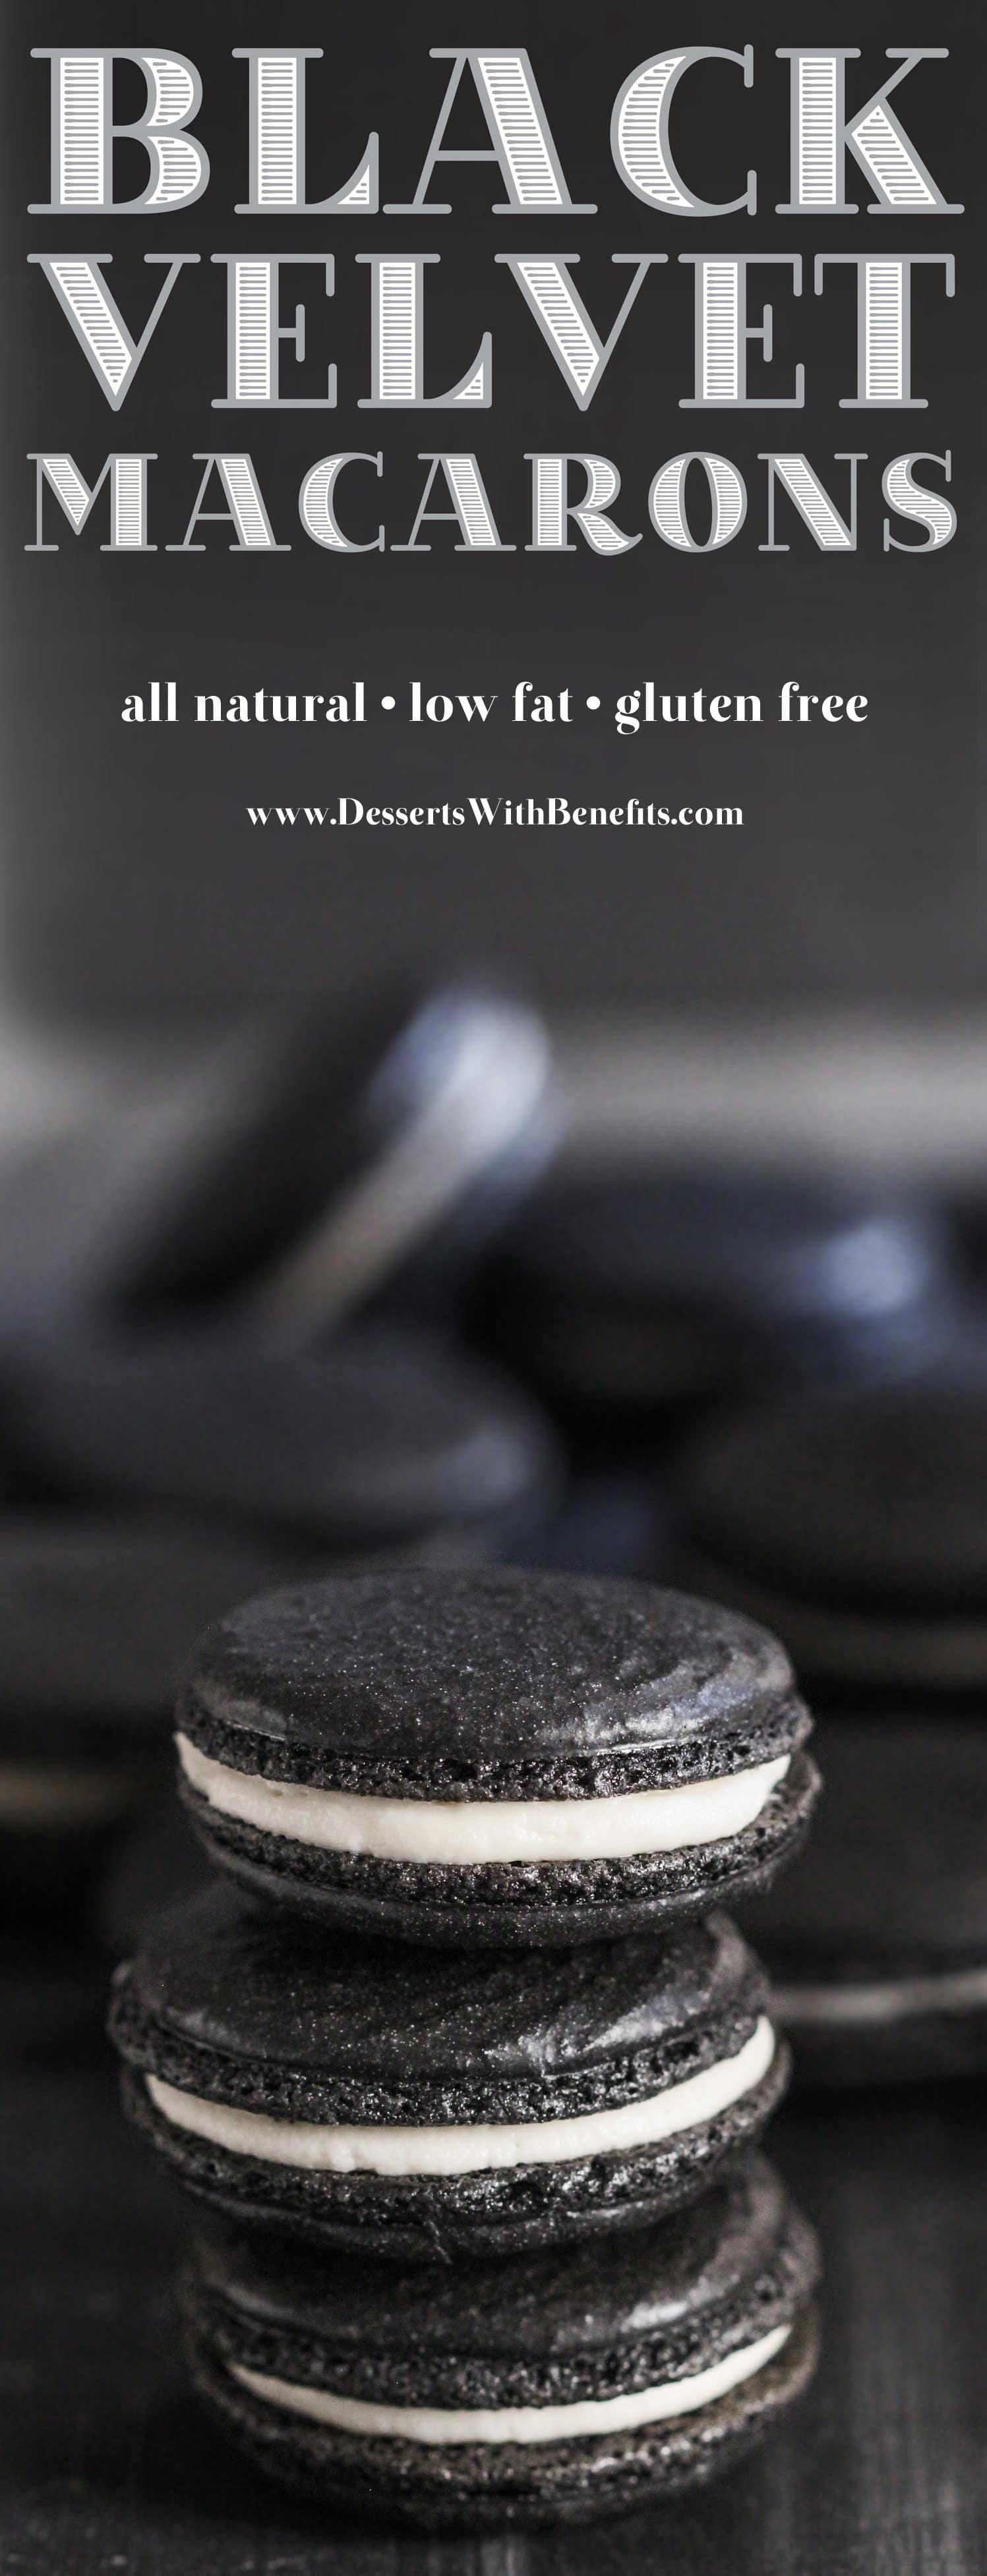 How to make GOTHIC MACARONS infused with chocolate and a secret ingredient! These Healthy Black Velvet French Macarons are just as sweet and delicious as your typical macarons, except these are all natural (no artificial food dyes), low fat, gluten free, and made without the bleached white sugar. PERFECT for Halloween! Healthy Dessert Recipes at the Desserts With Benefits Blog (www.DessertsWithBenefits.com)